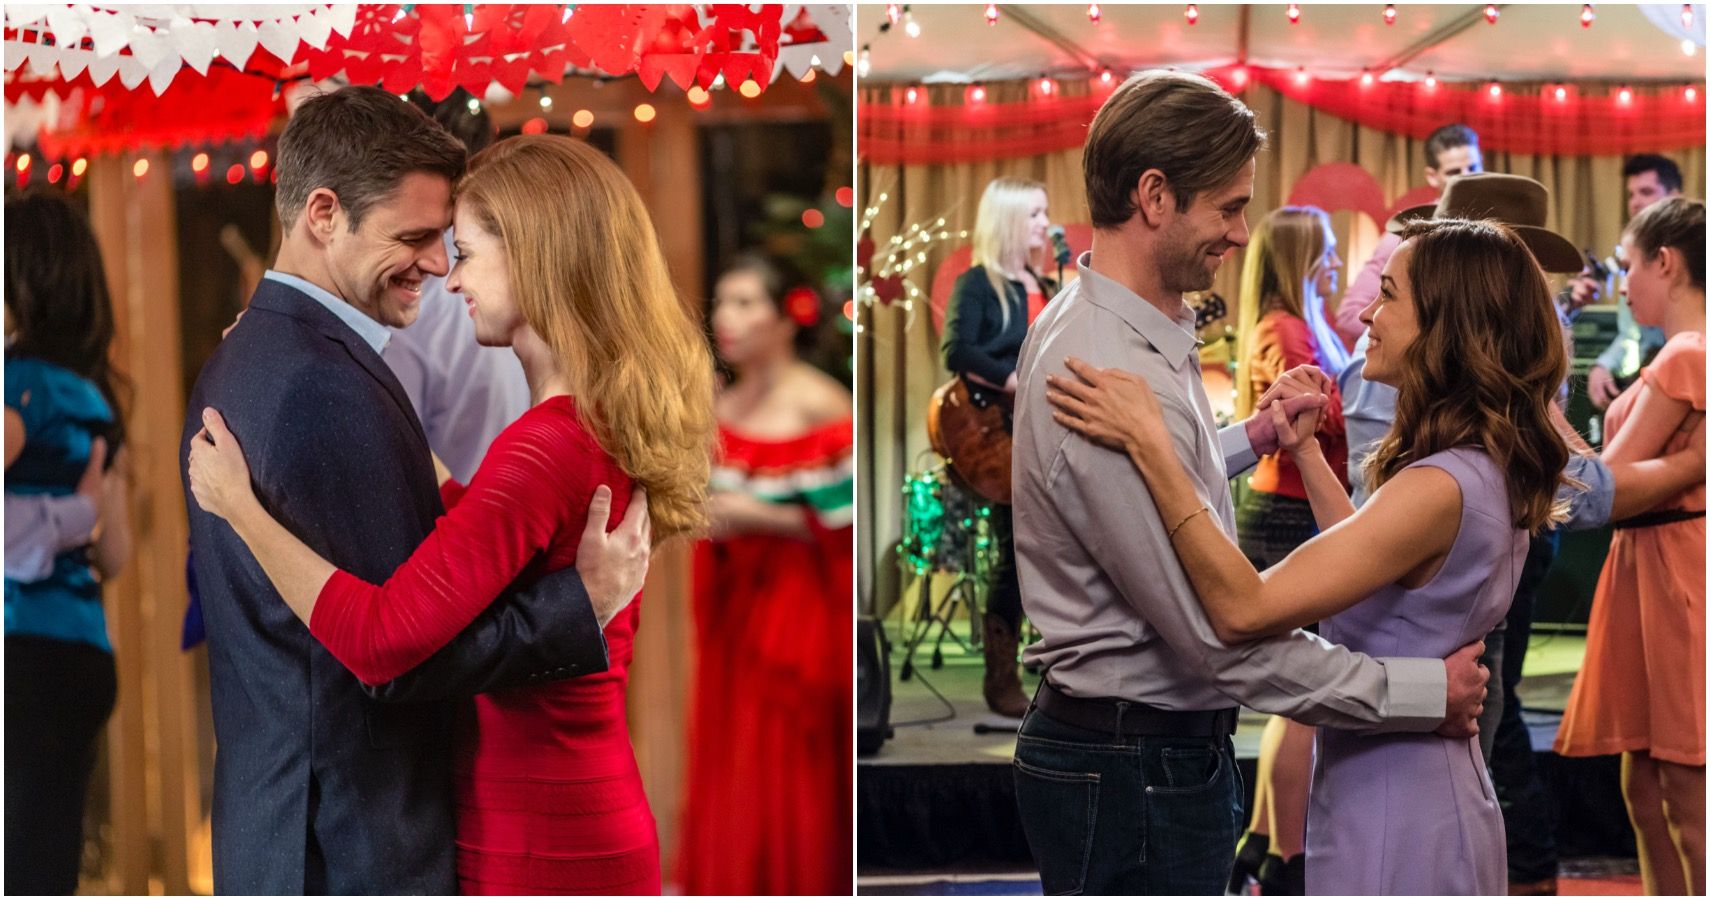 10 Hallmark Valentines Movies Even Our Cynical Partners Will Love